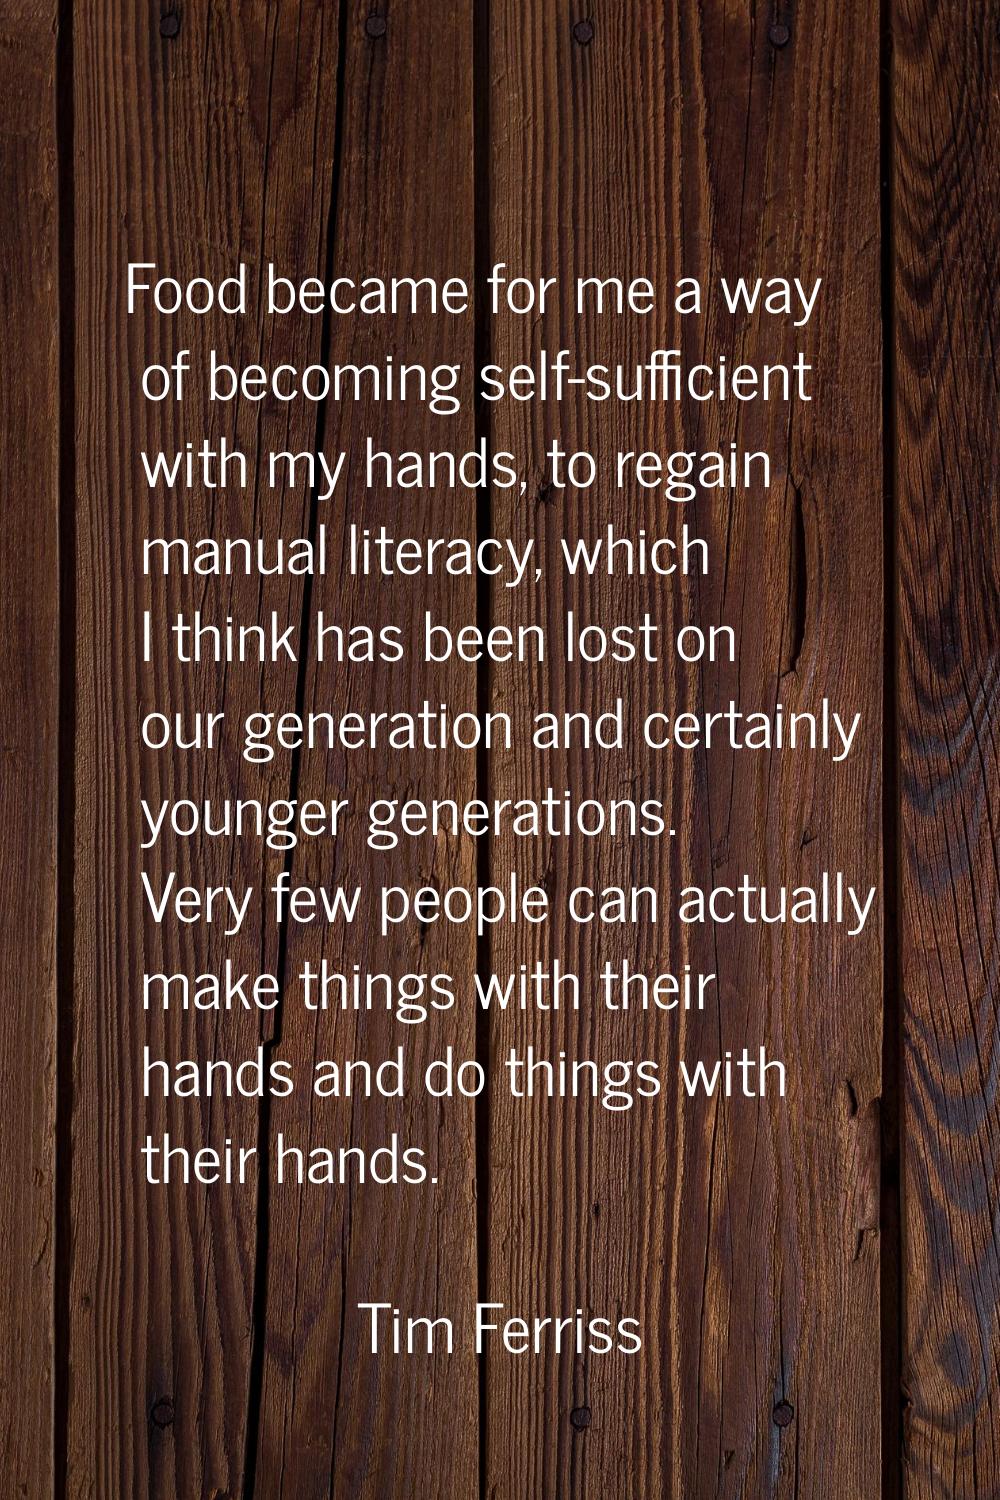 Food became for me a way of becoming self-sufficient with my hands, to regain manual literacy, whic